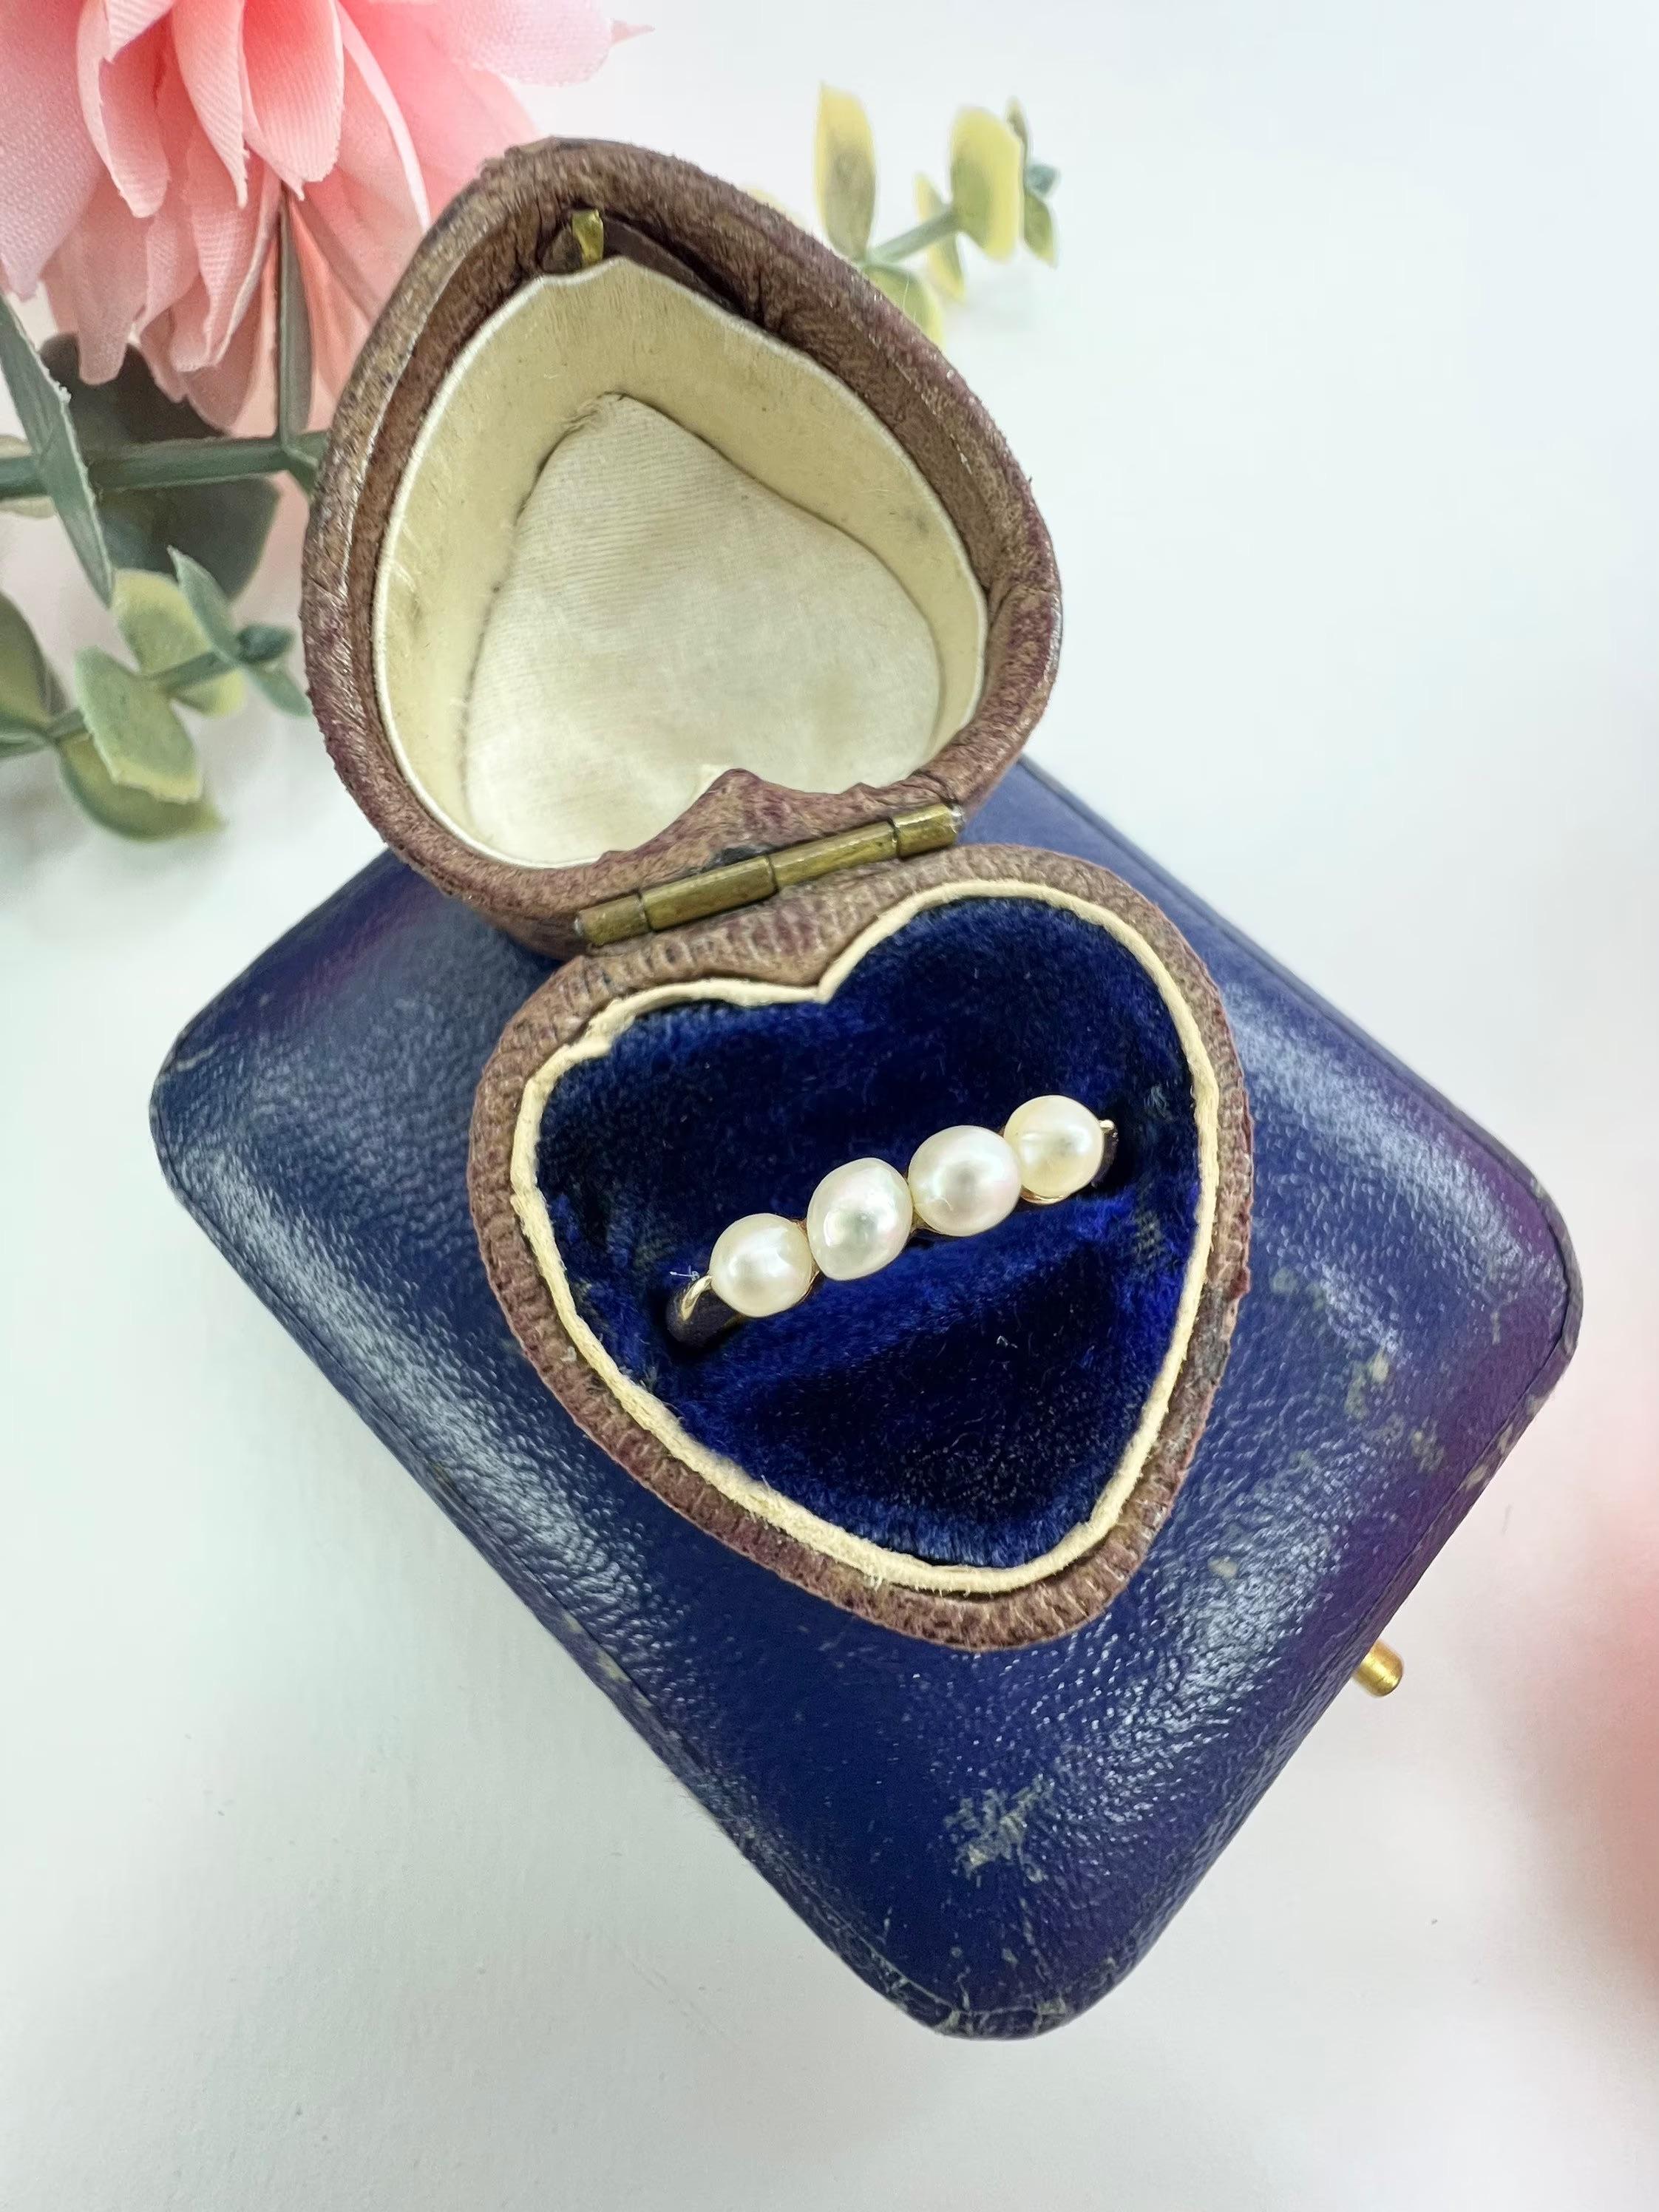 Vintage Pearl Ring 

14ct Gold Stamped 

Circa 1980’s

Pretty Little Vintage Ring, Set with Four Beautiful Cultured Pearls. 

Width Measures Approx 11mm & Height Approx 3mm

UK Size J

US Size 5

Can be resized using our resizing service,
please